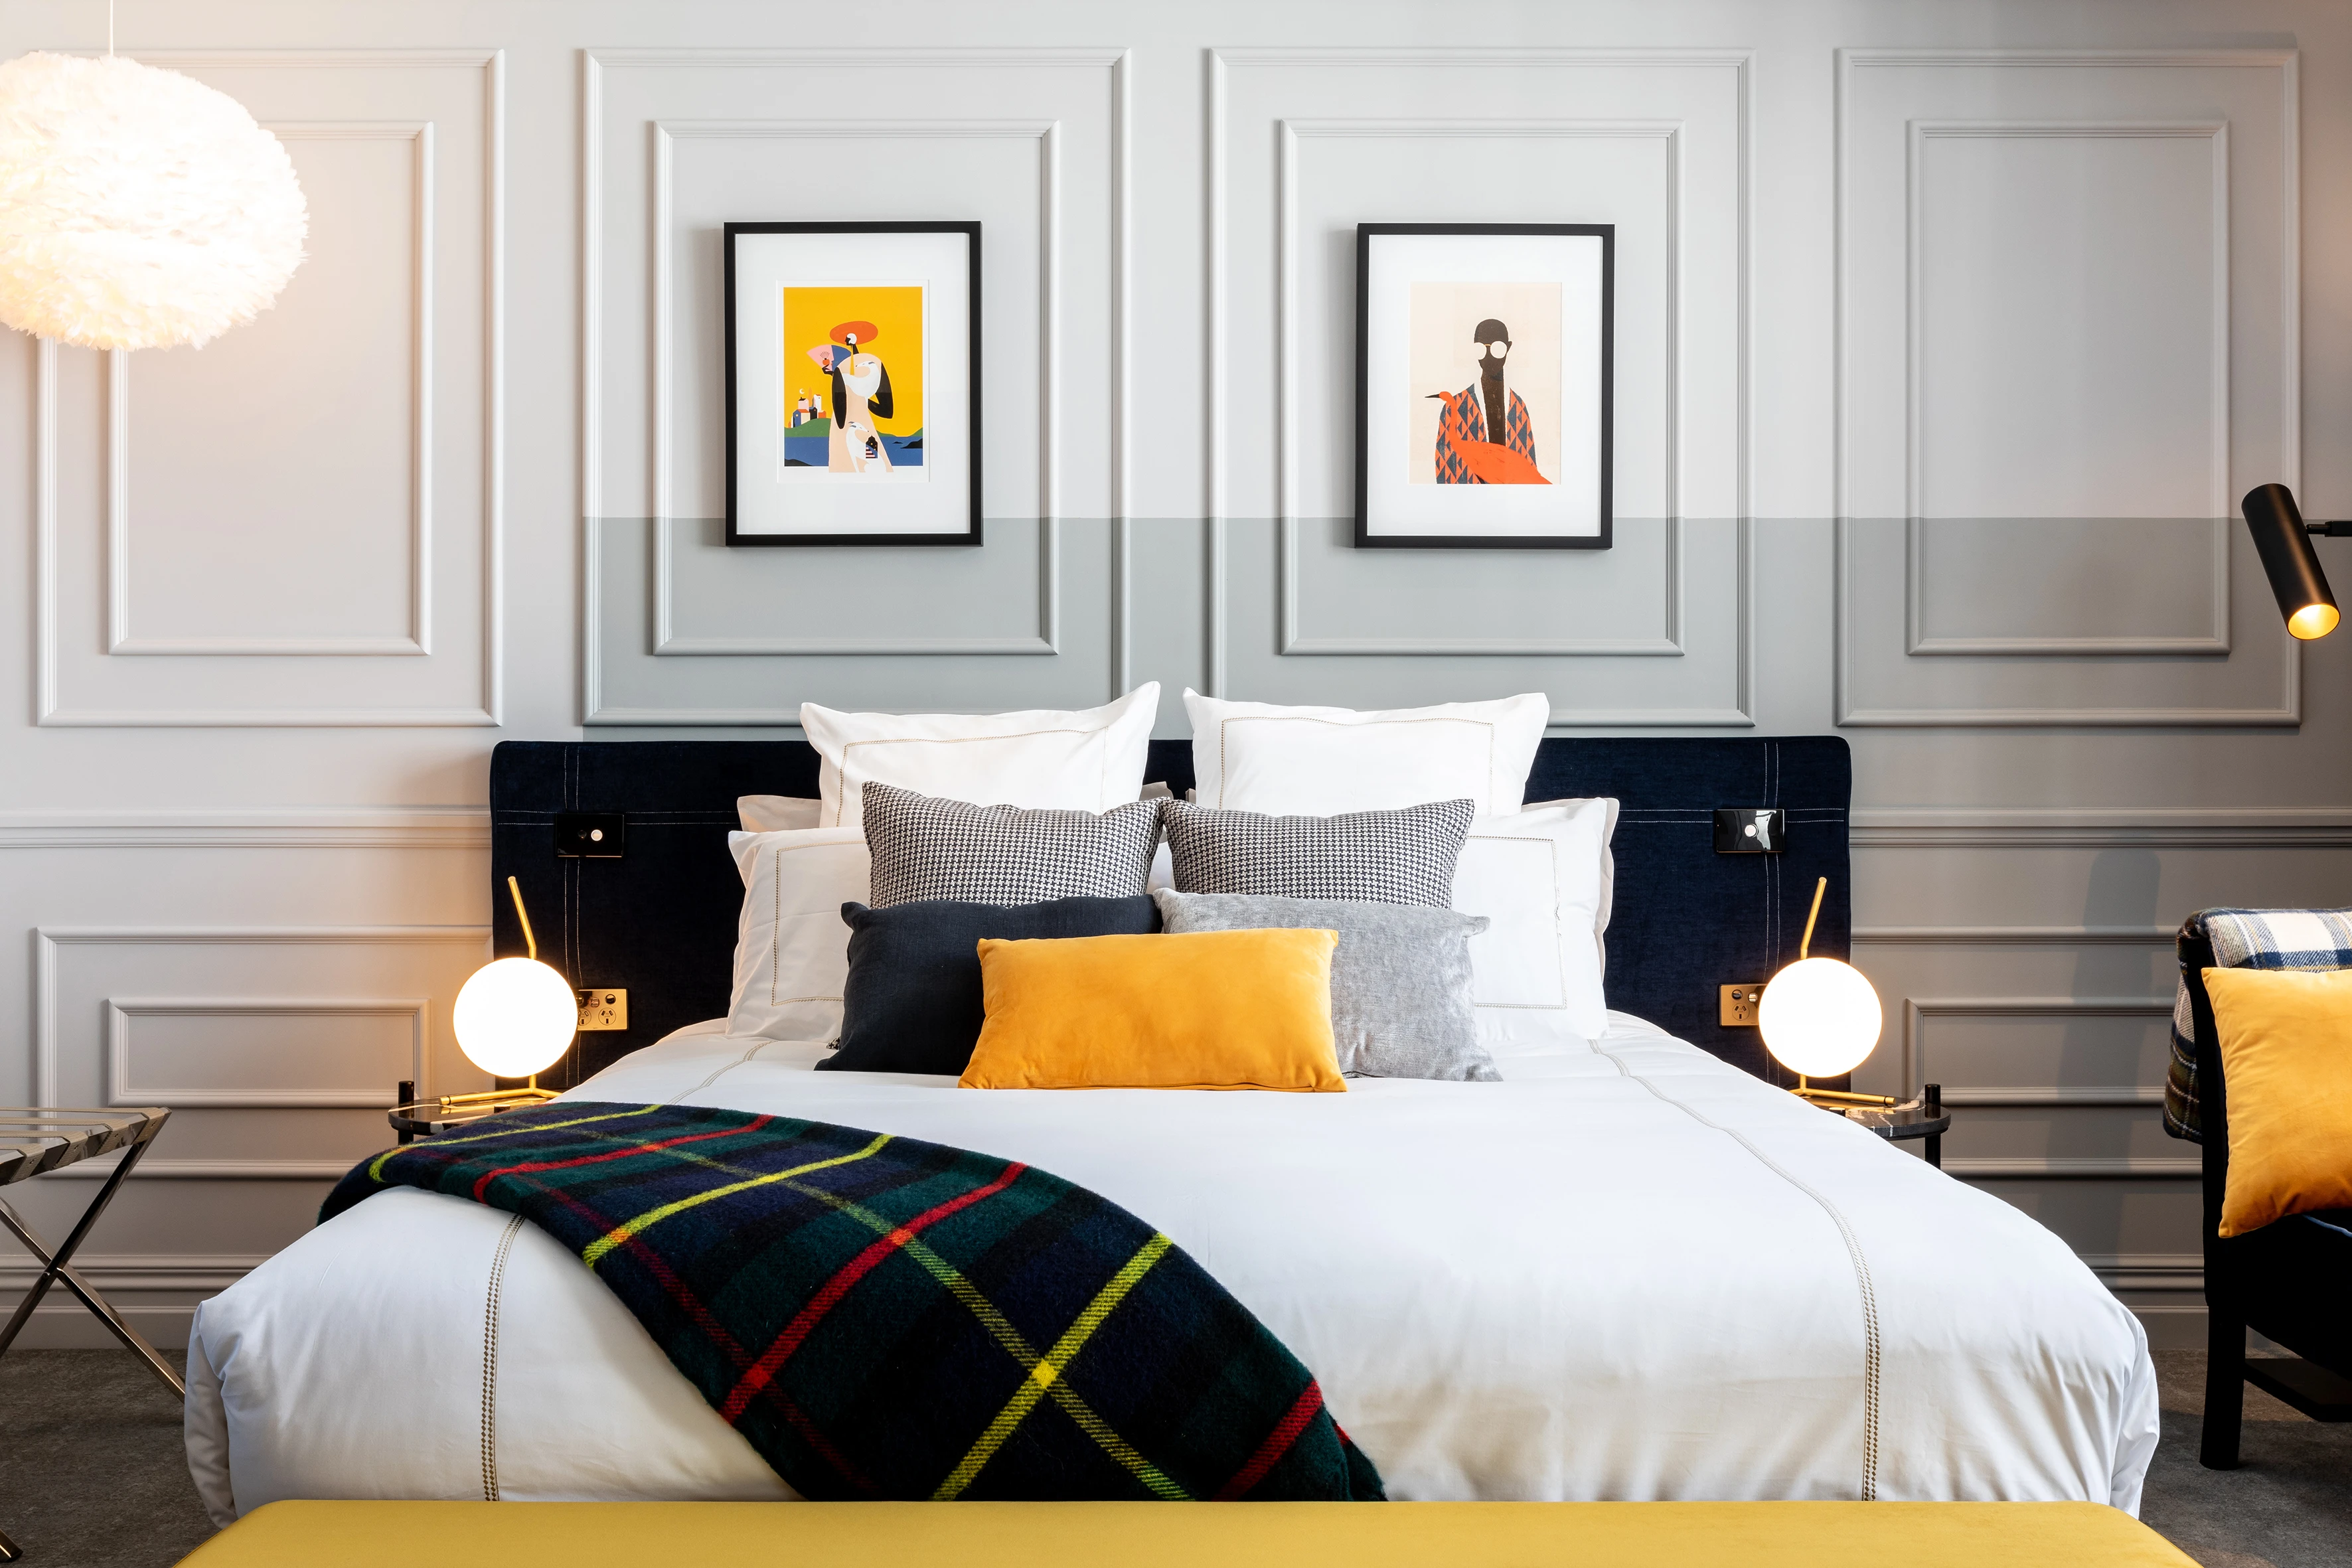 Hotel room with grey walls, artwork and bed with pillows and cushions